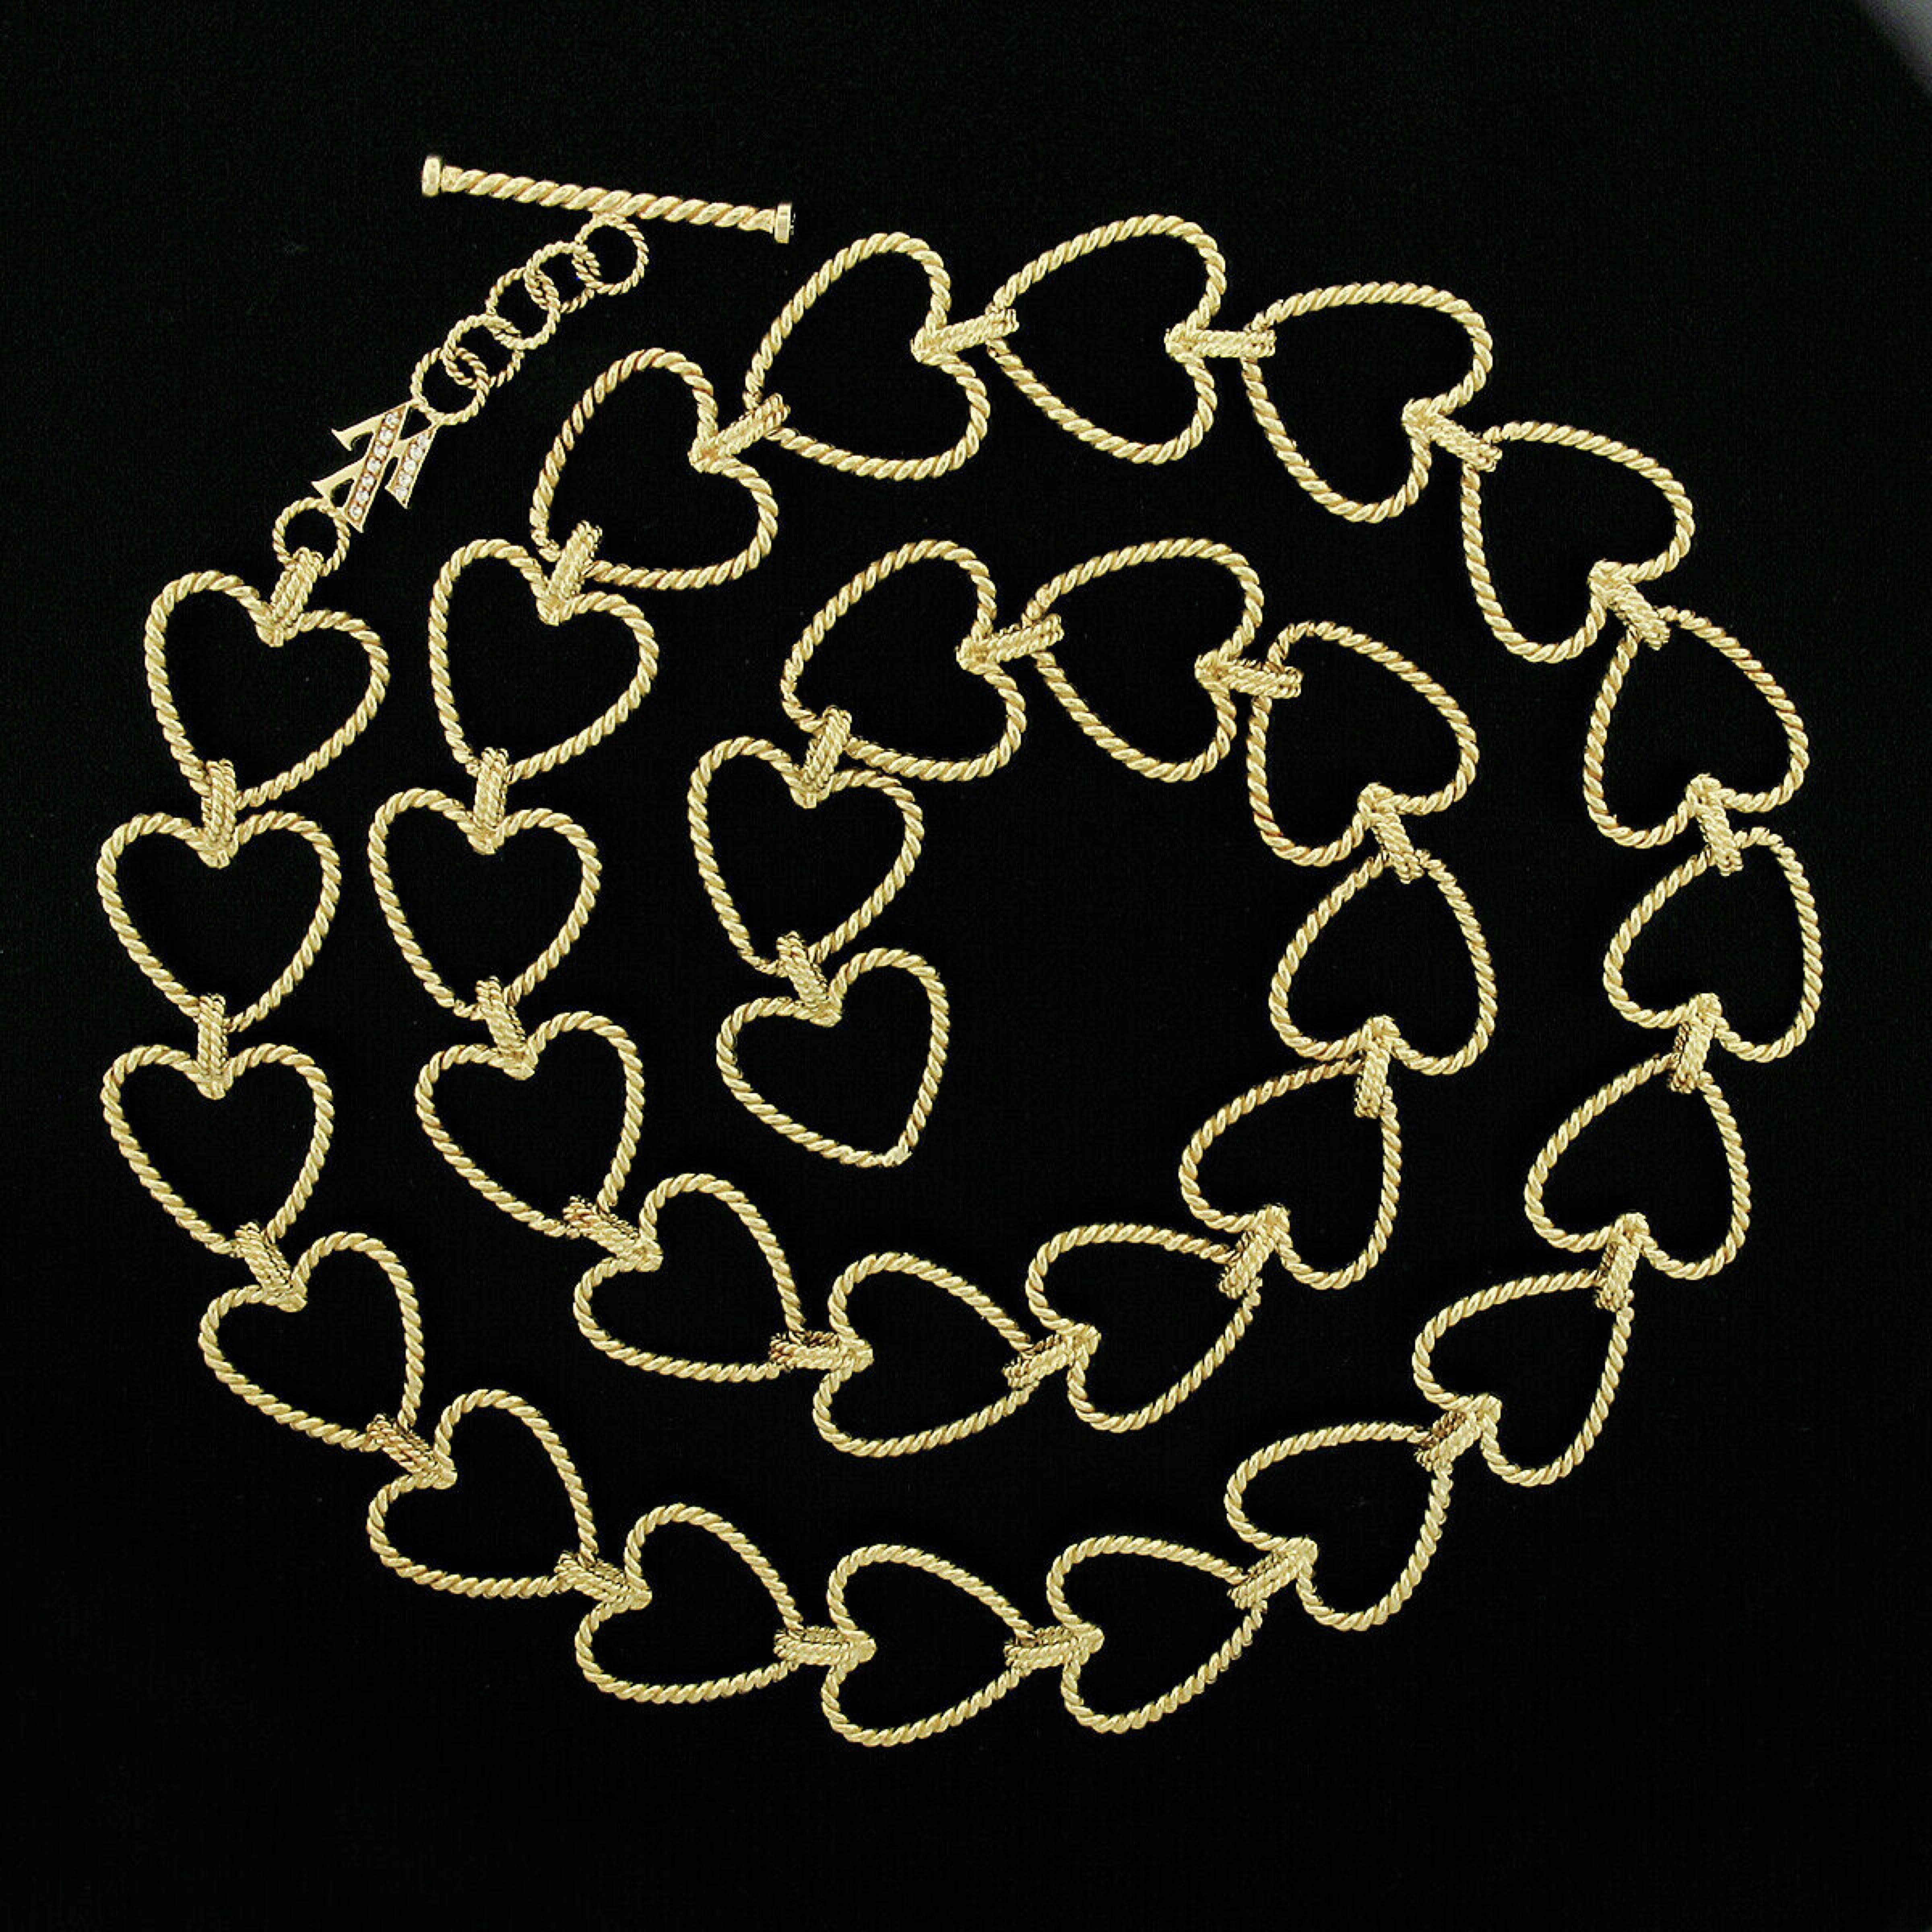 Round Cut Vera Wang 18K Gold Cable Open Heart Link Chain Necklace w/ Diamond Toggle Clasp